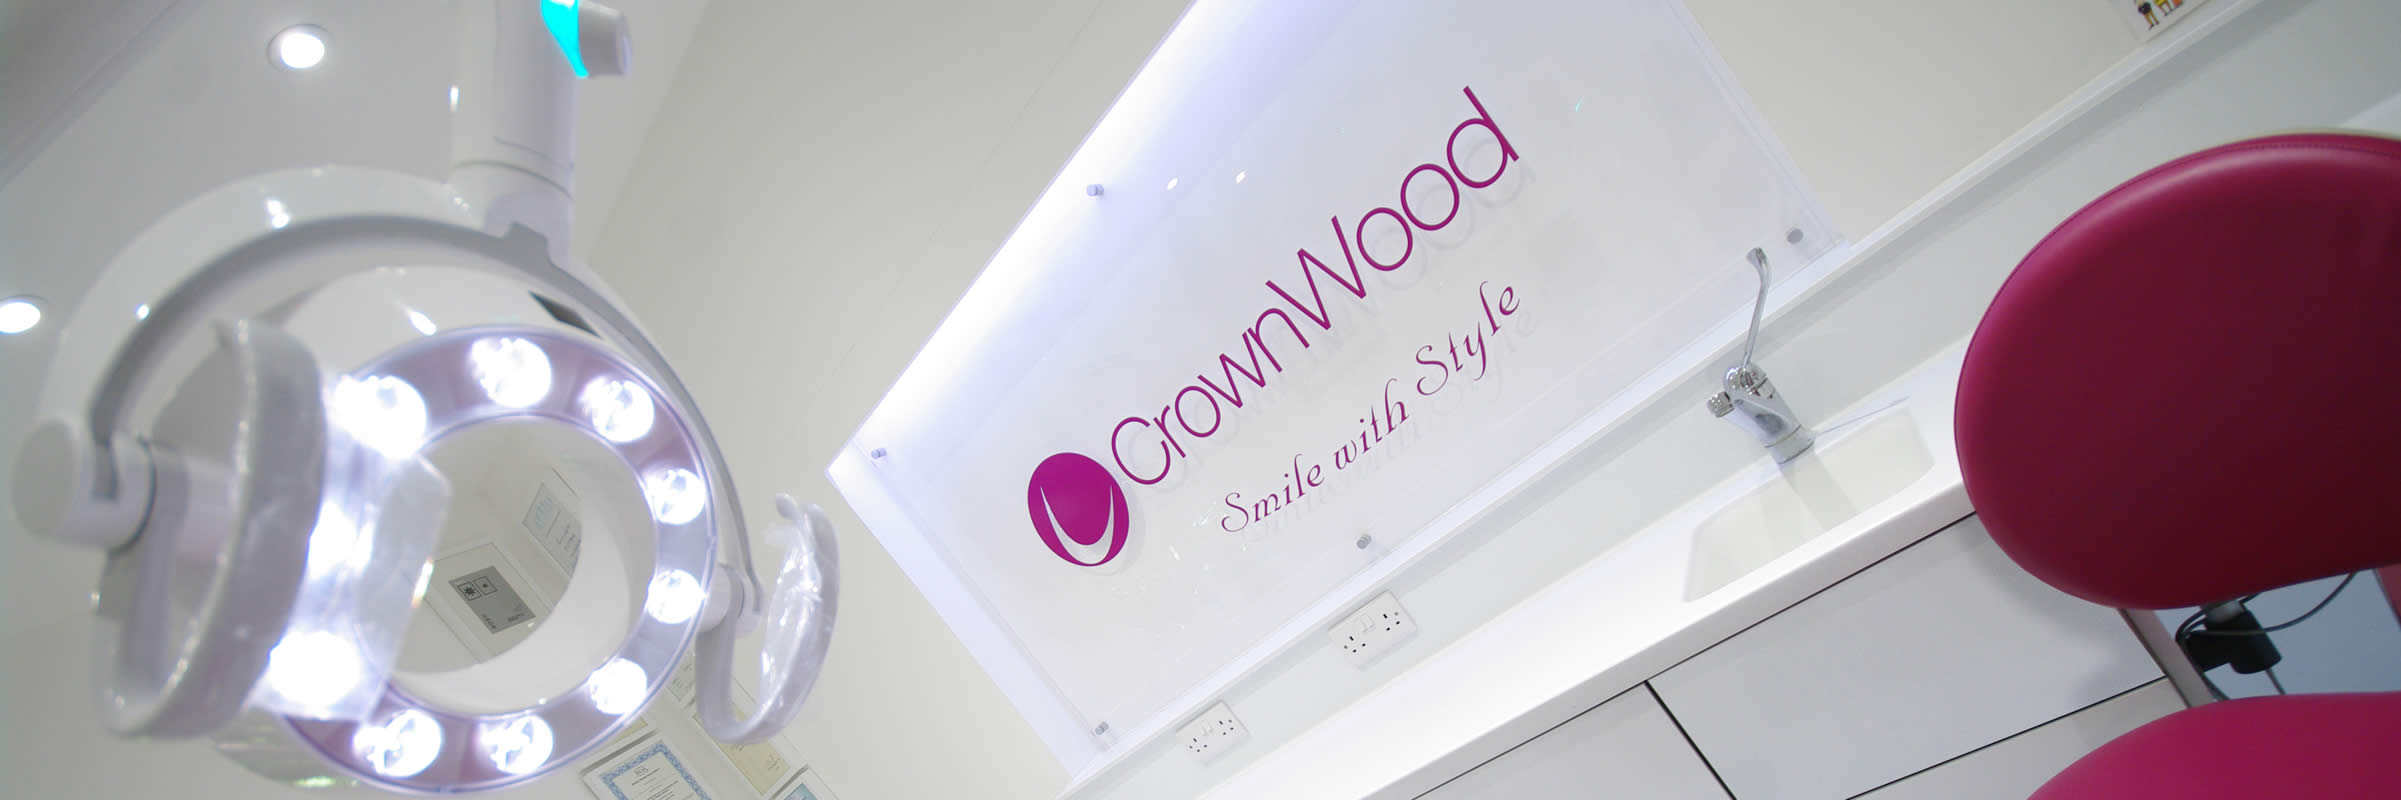 Examples of the work carried out at CrownWood Dental Practice in Bracknell